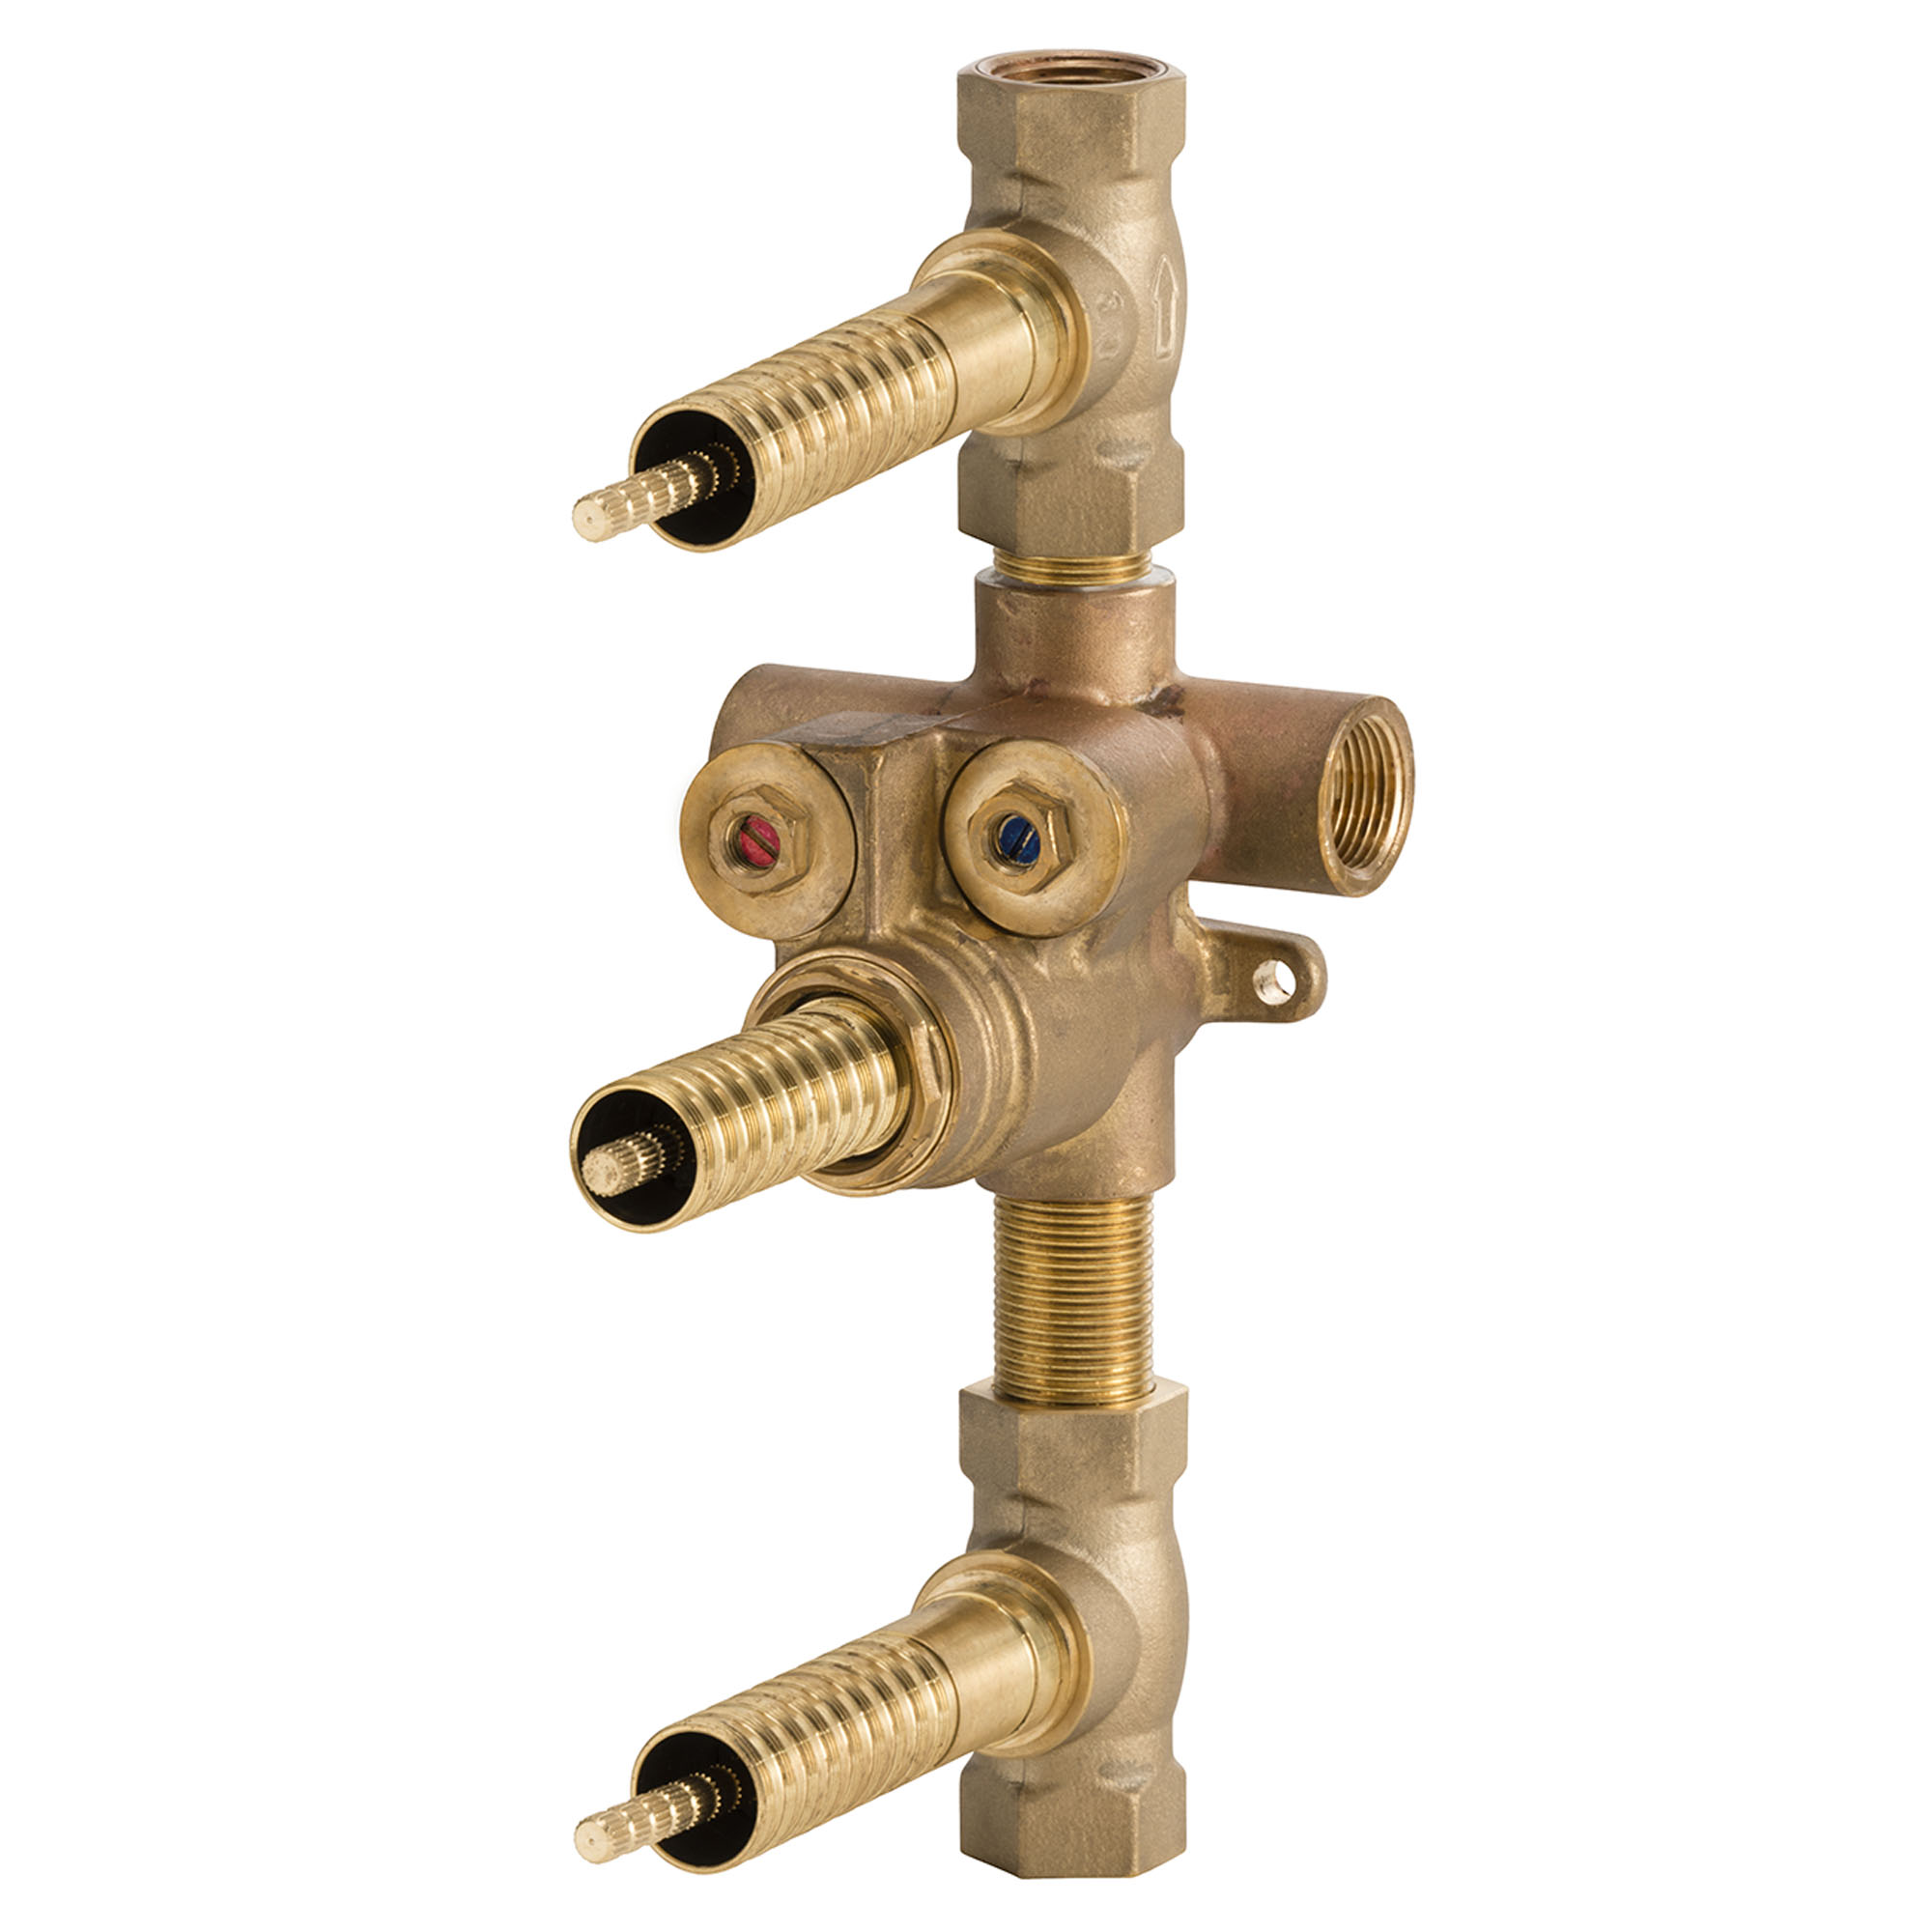 3-Handle Thermostatic Rough Valve with 2 Volume Controls